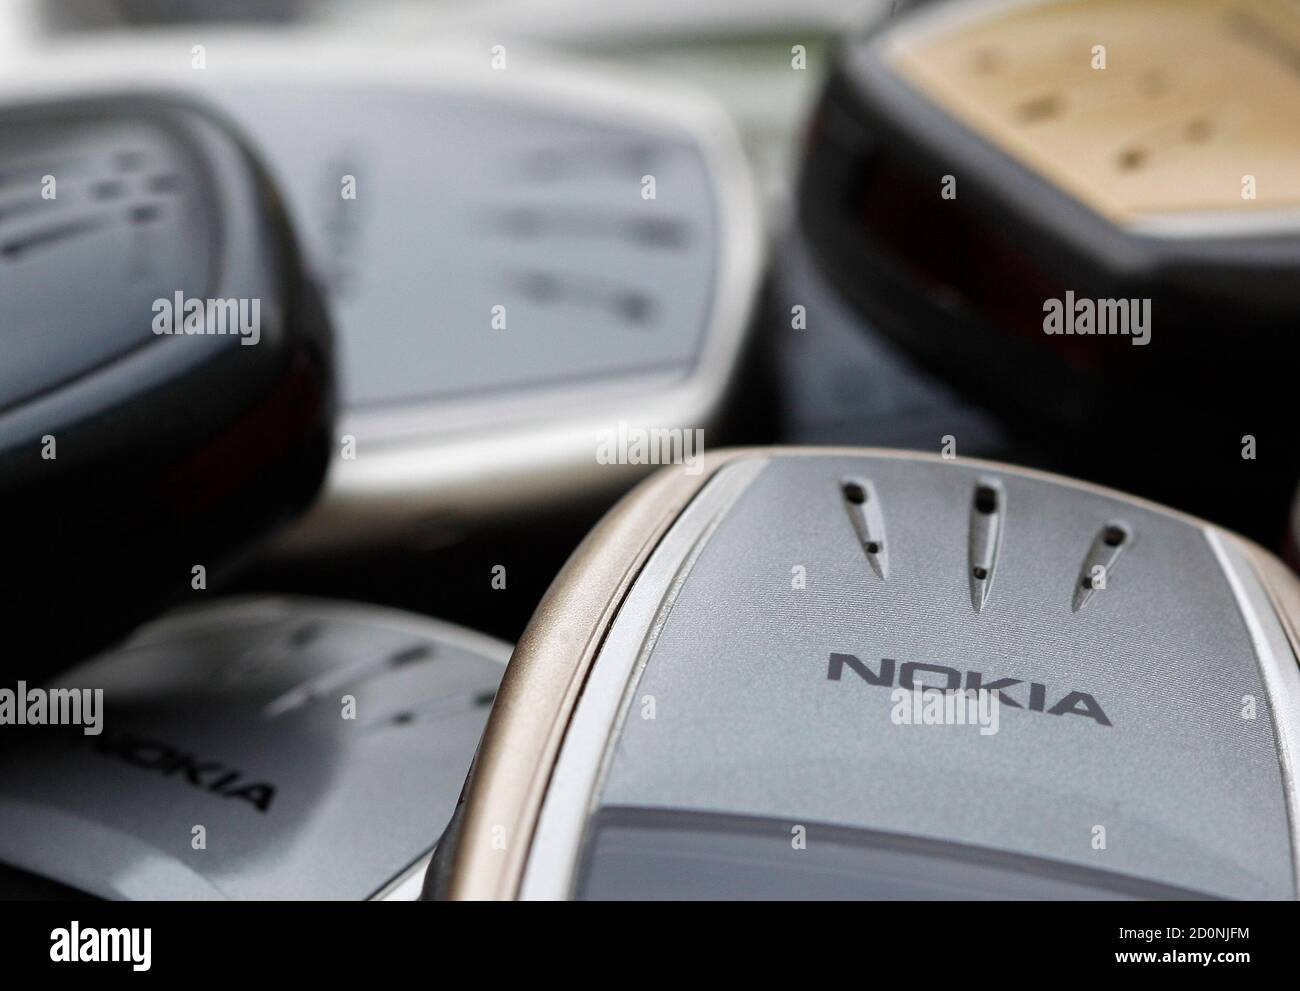 Illustration picture shows Nokia logo on used cell phones, in Zurich, April  30, 2012. REUTERS/Christian Hartmann (SWITZERLAND - Tags: BUSINESS TELECOMS  Stock Photo - Alamy